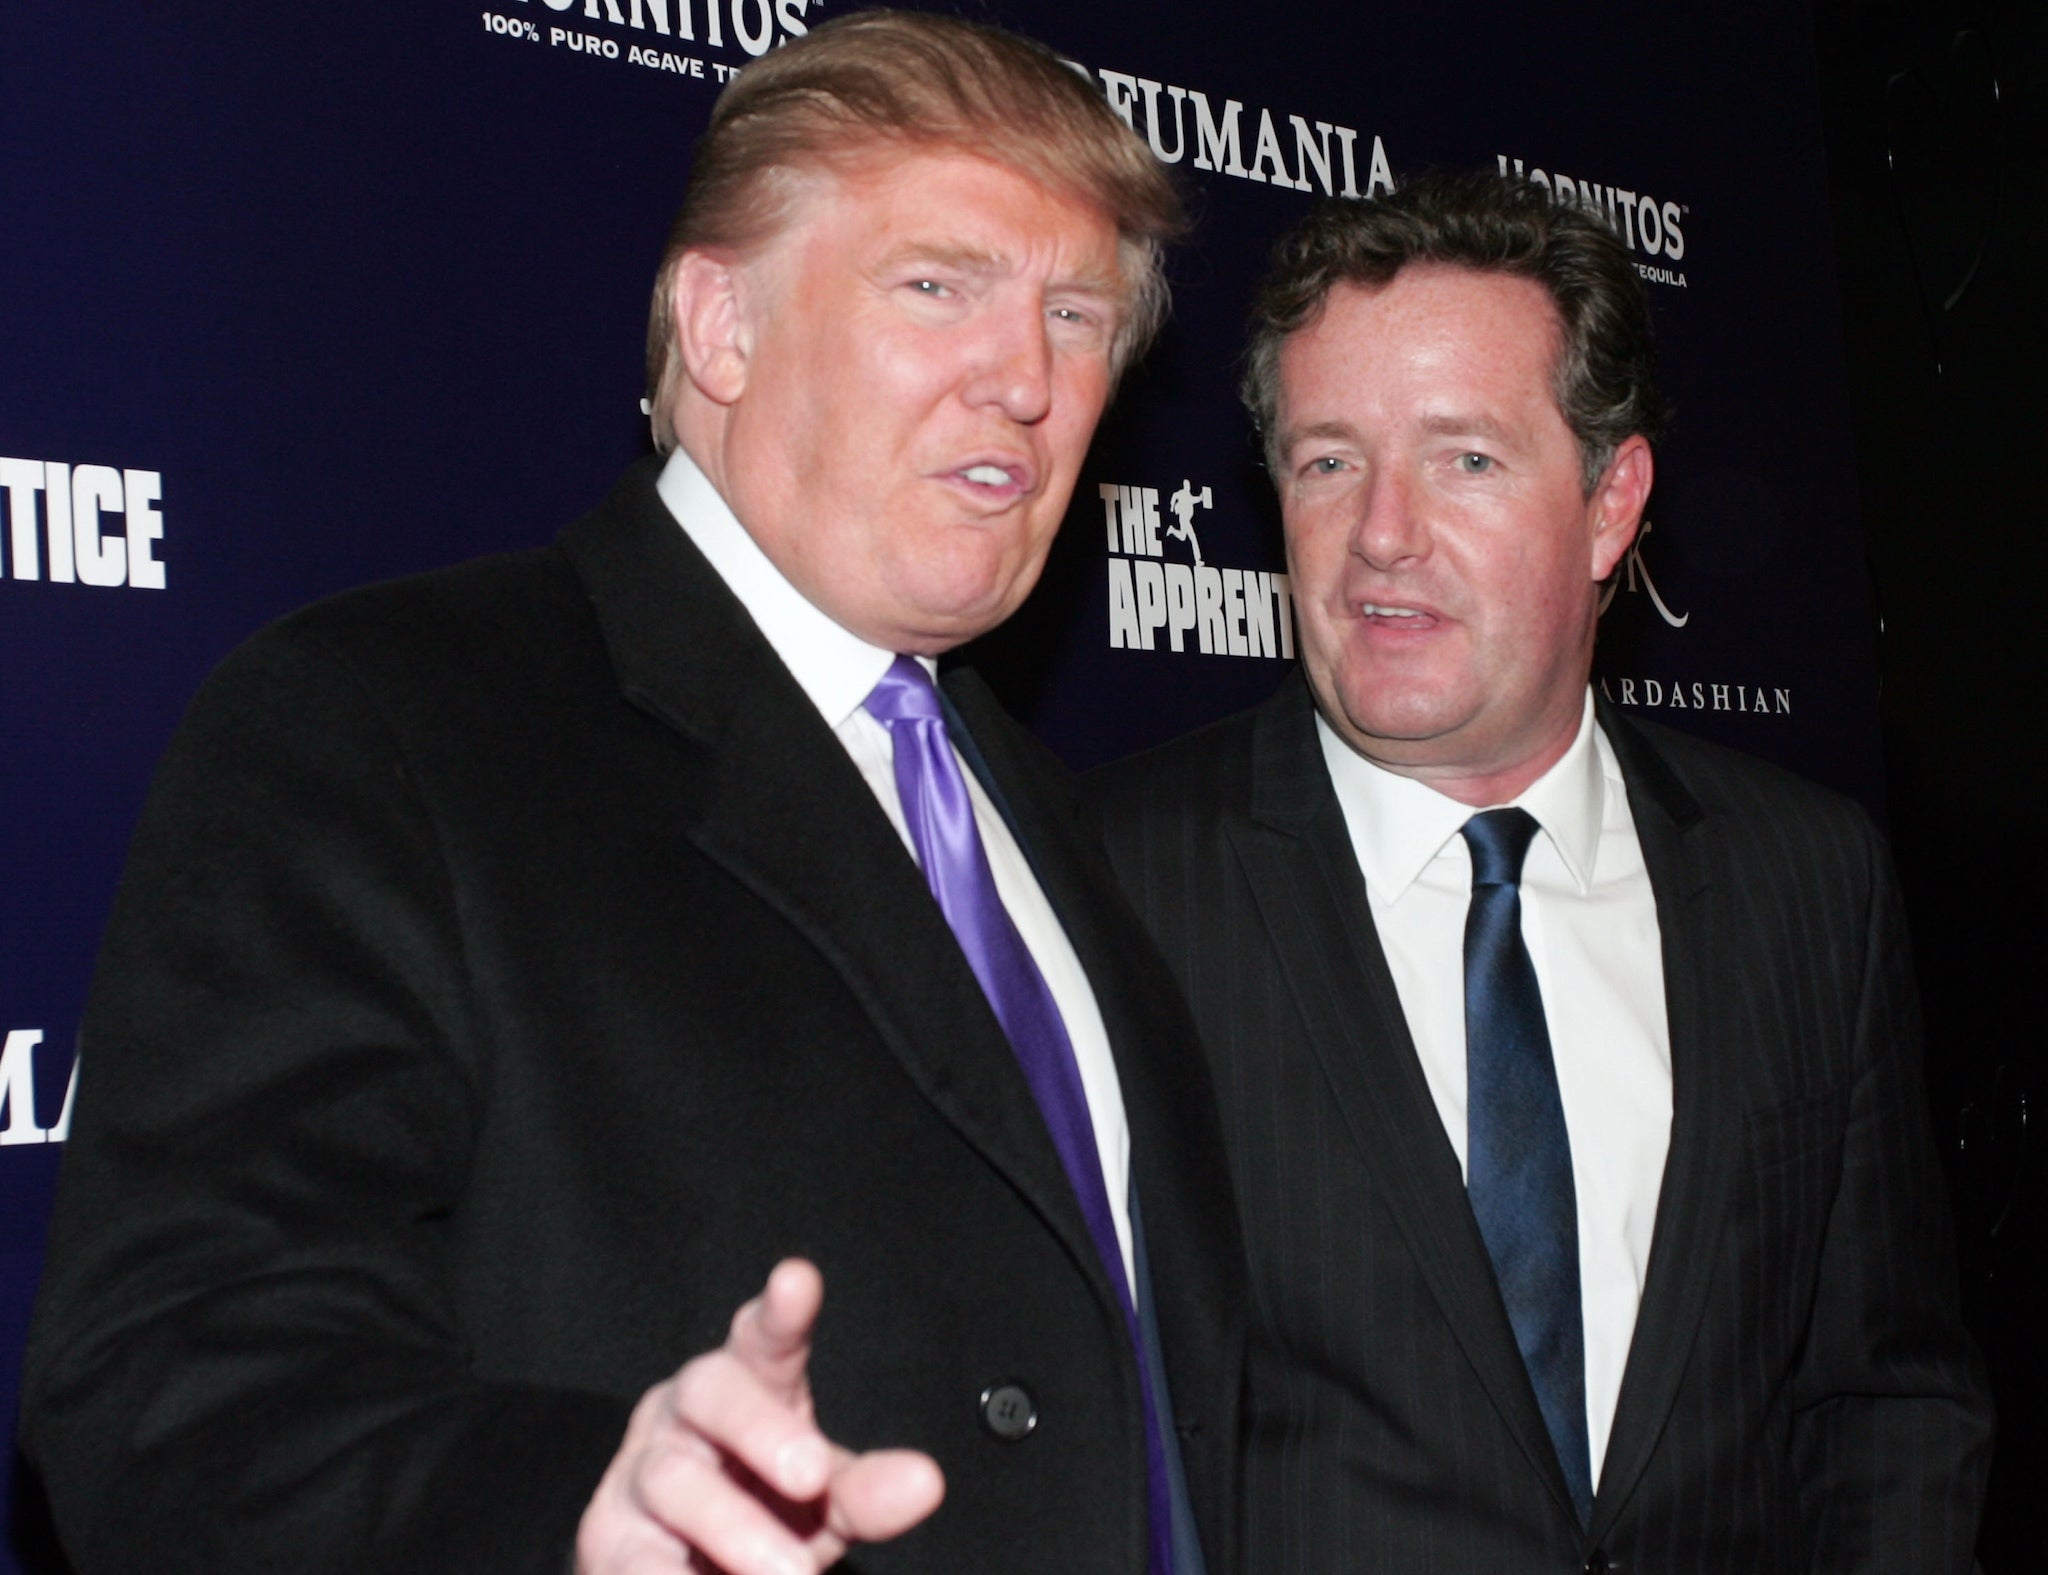 Trump, who has been accused of sexism in the leaked video, with ally Piers Morgan in November 2010